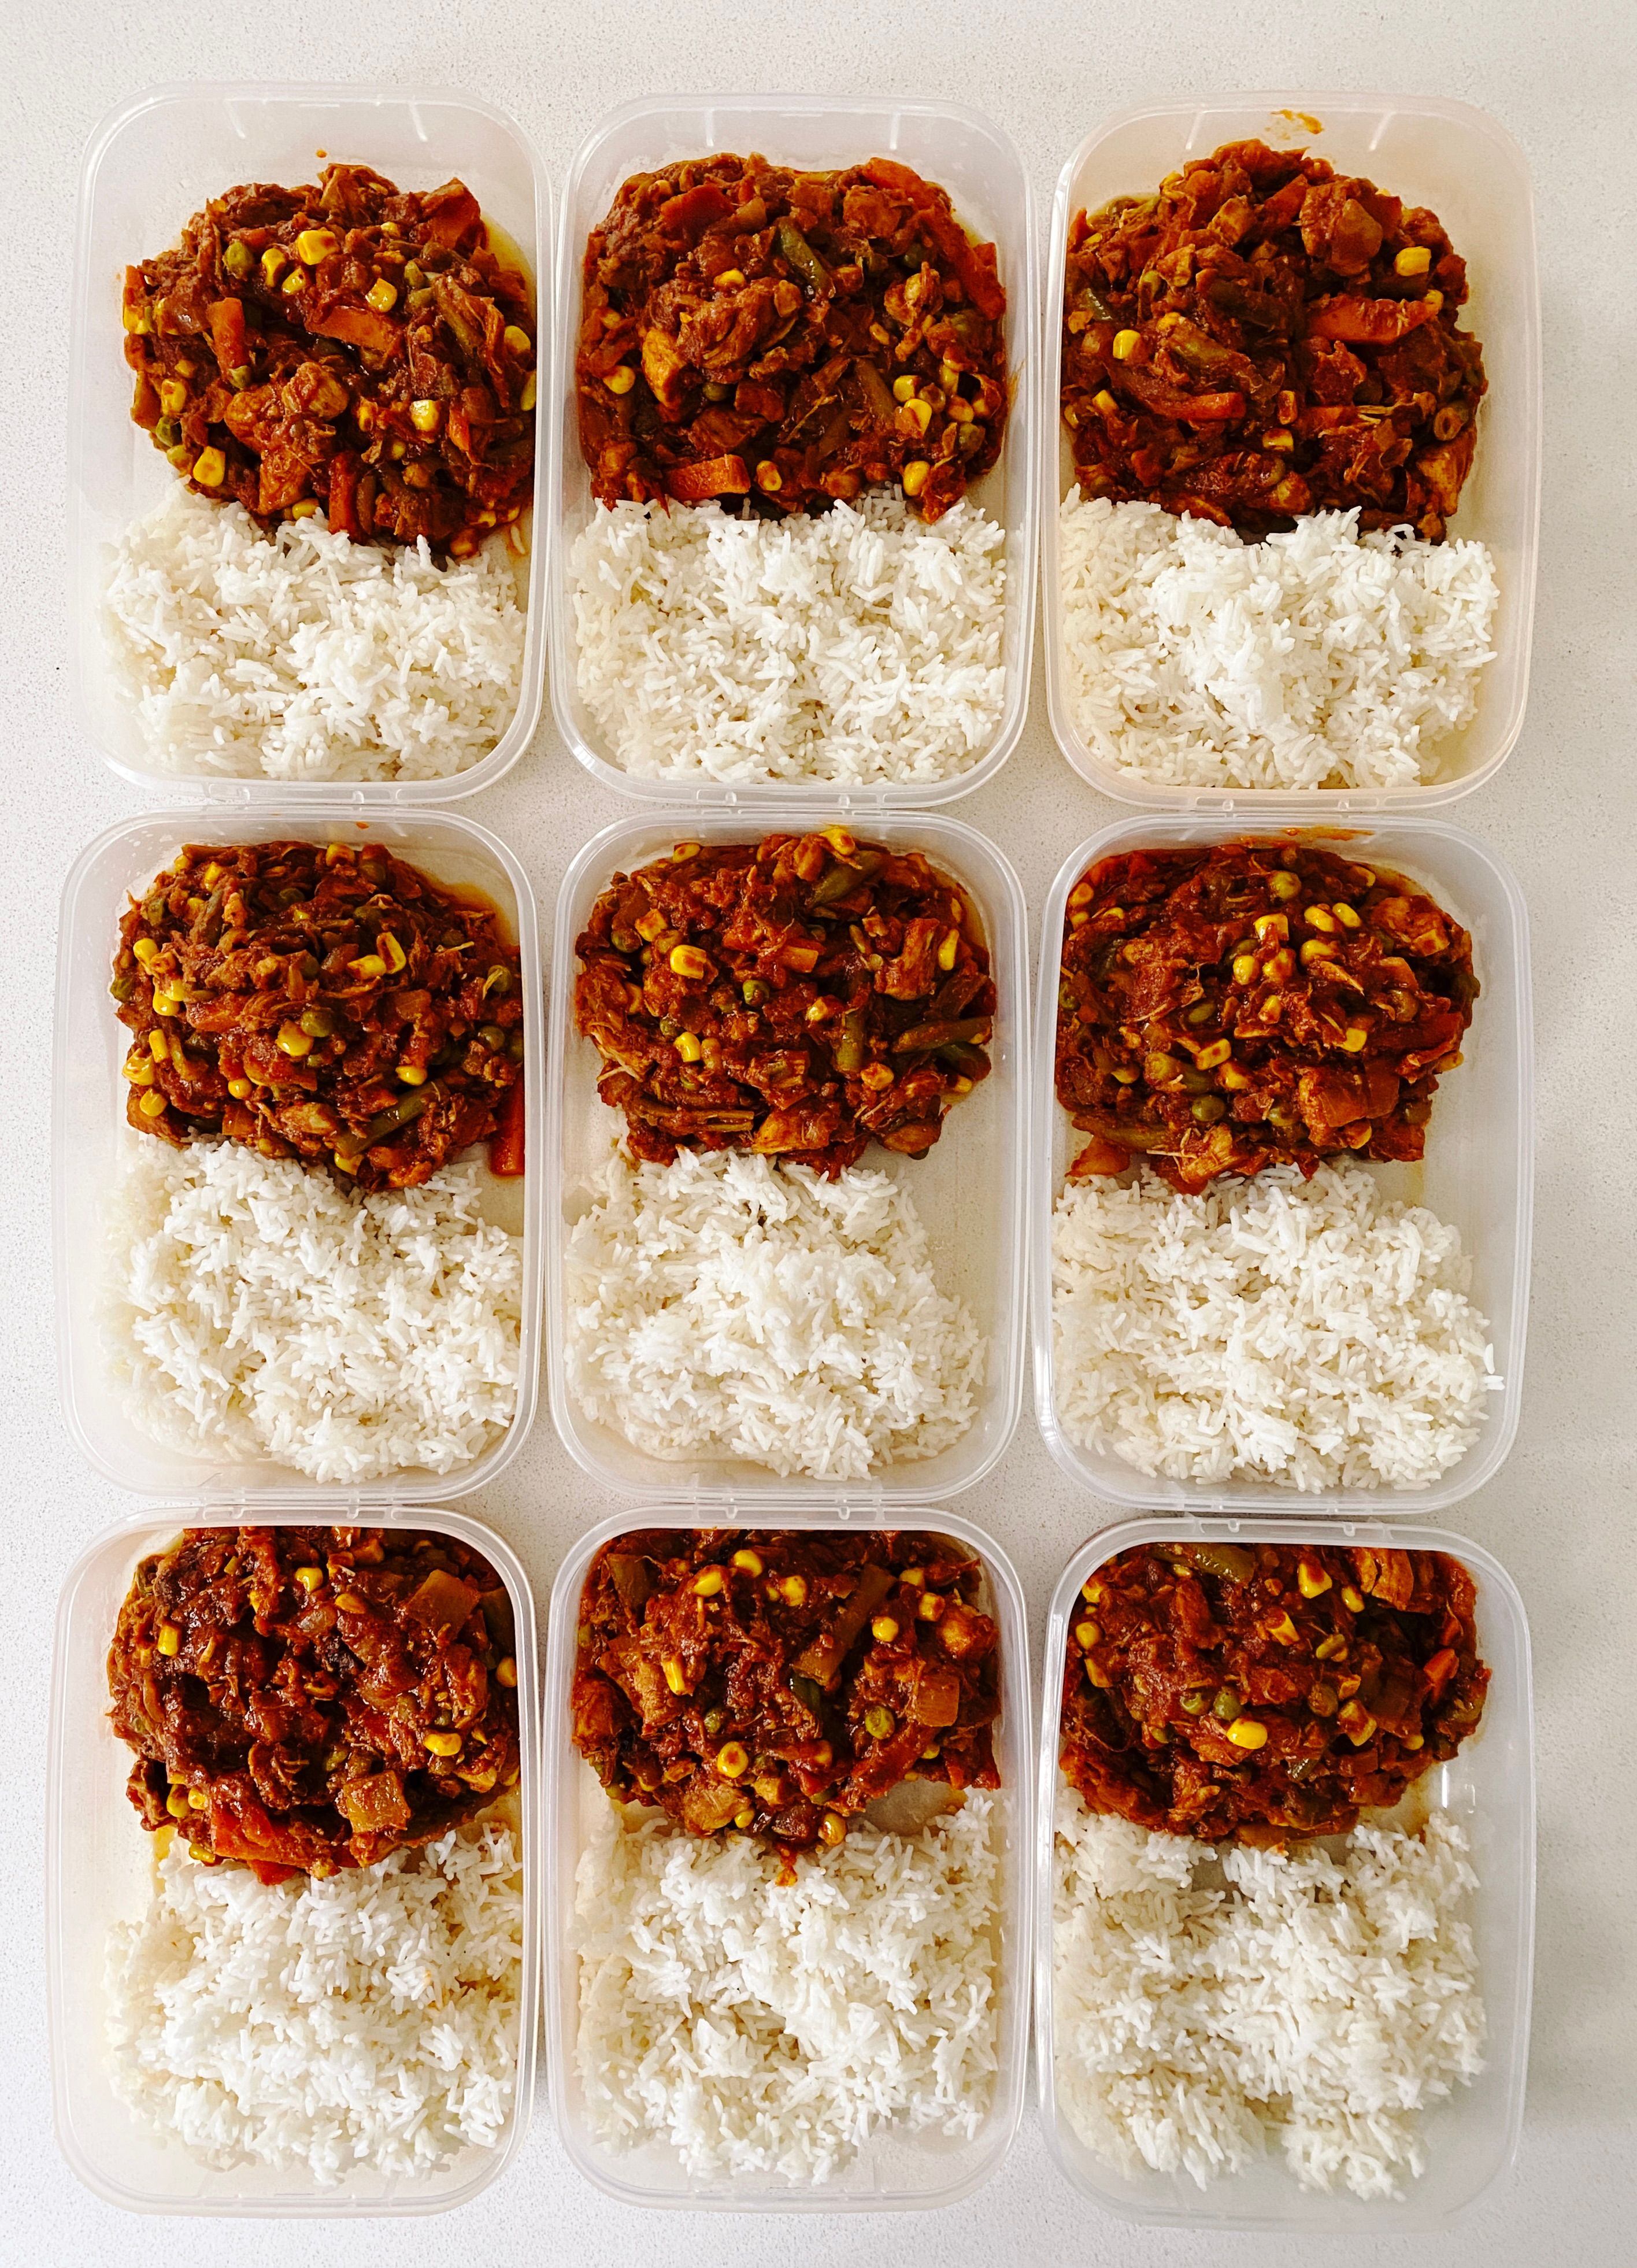 A photo of nine Tupperware containers in three-by-three pattern, each filled with half rice and half a rich red chicken curry with peas, green beans, carrots, and corn in it.